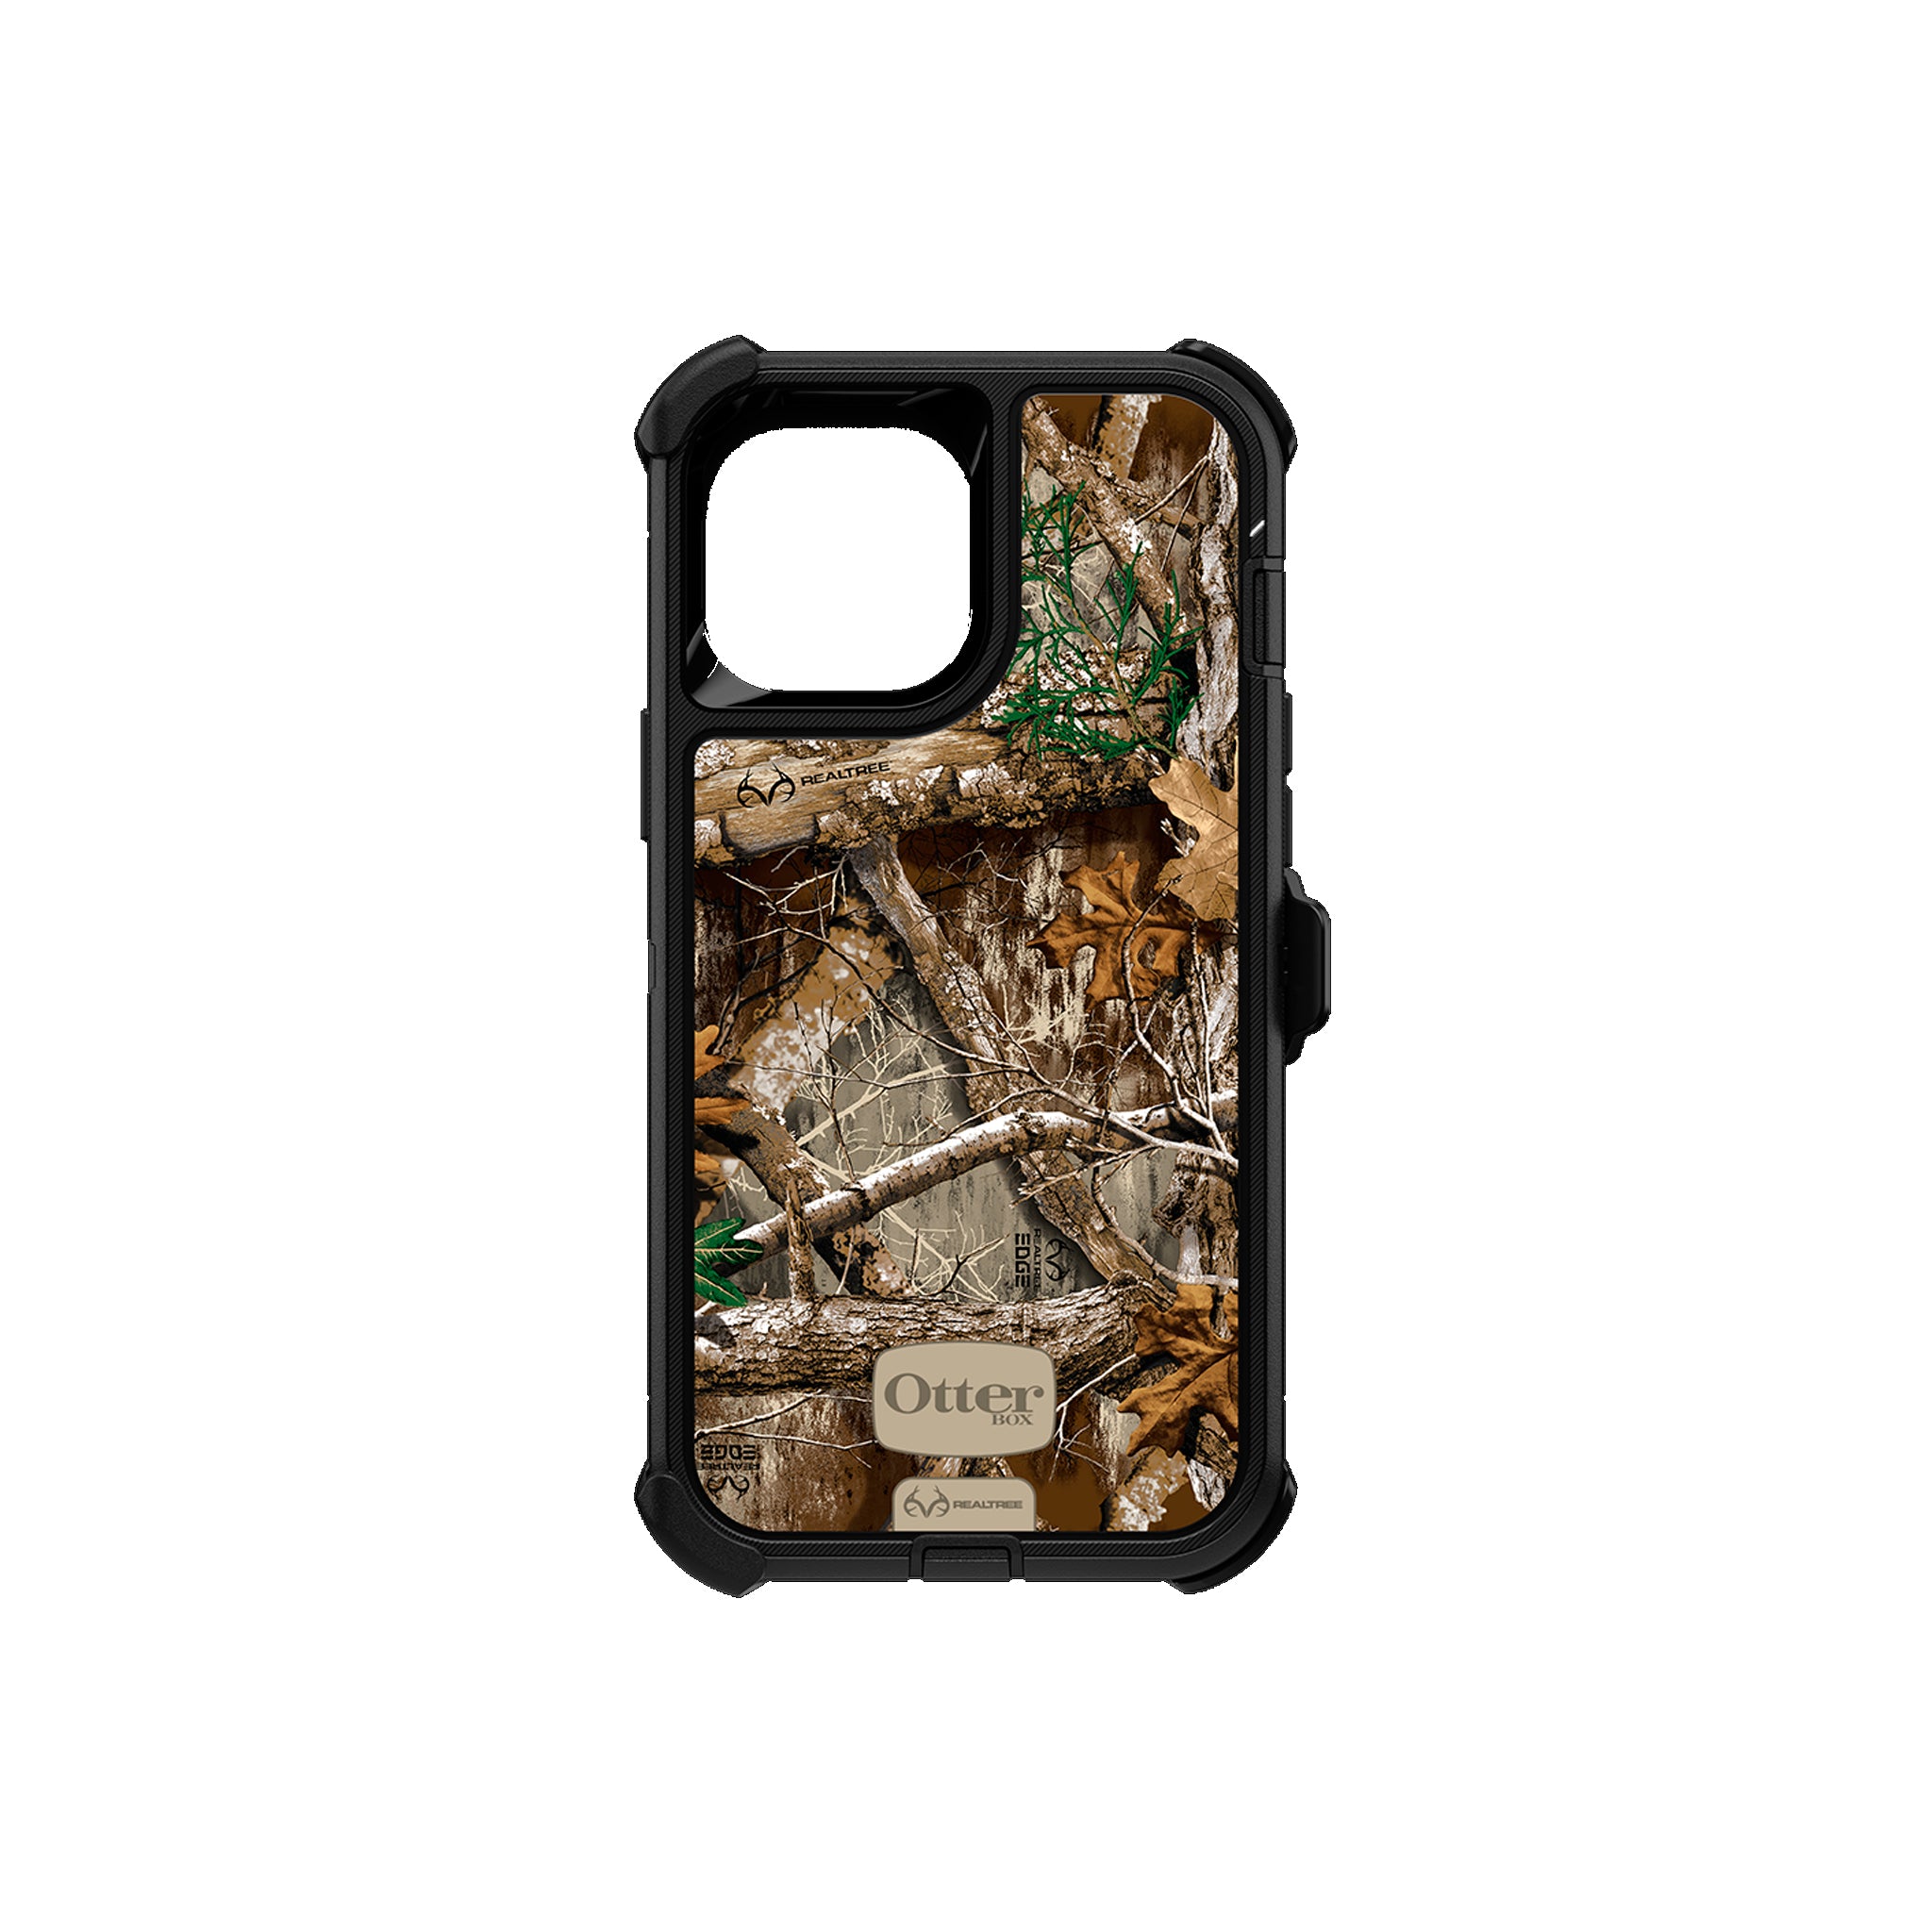 OtterBox - Defender for iPhone 12 Pro Max - RealTree Edge Black